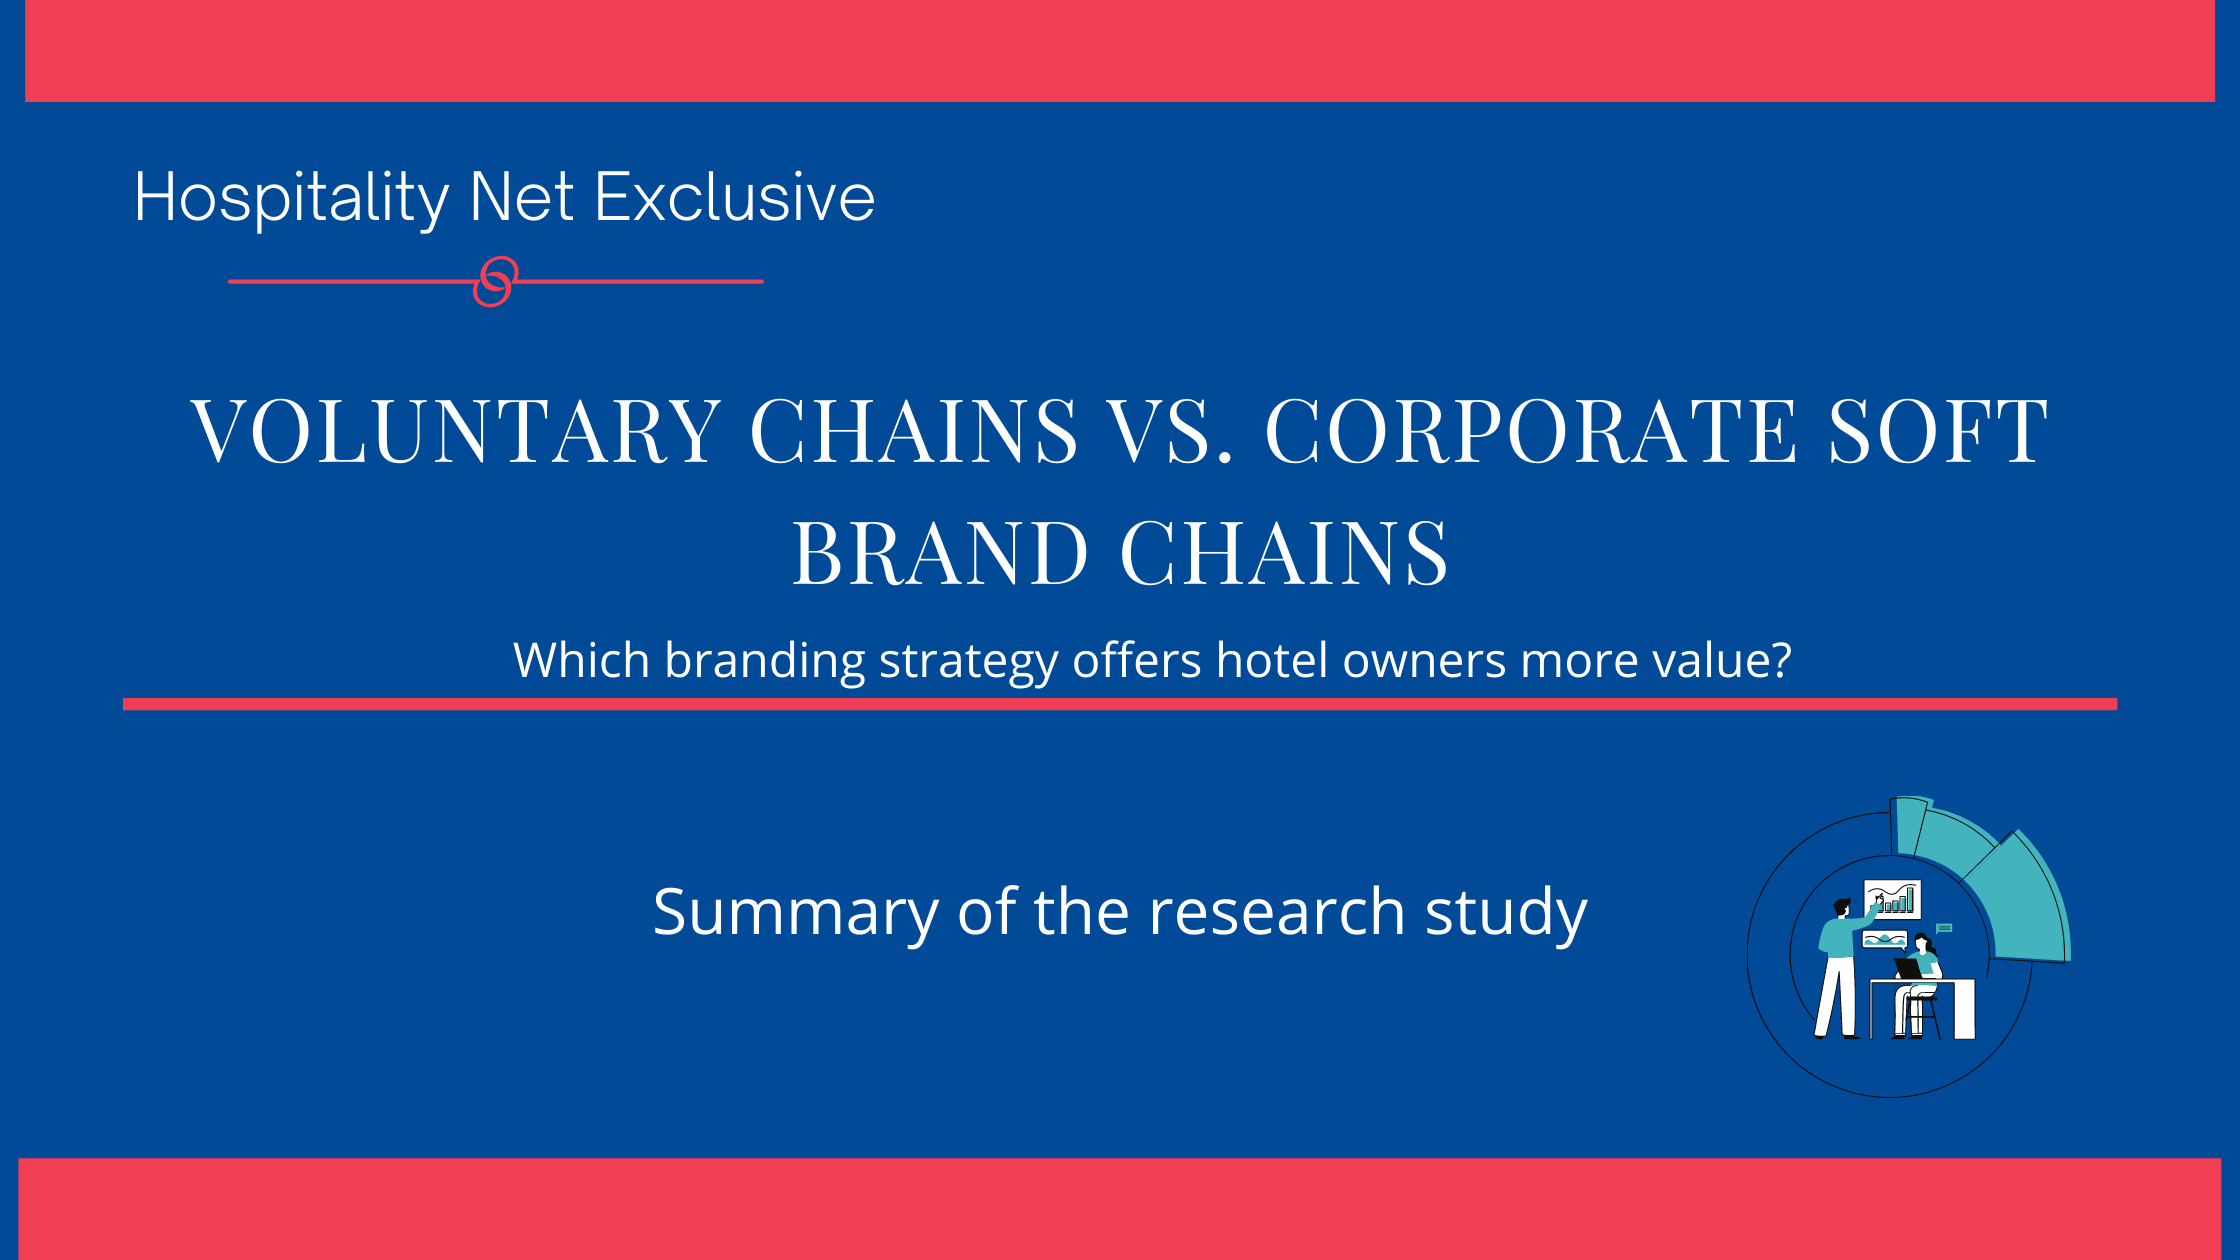 Hospitality Net exclusive: Voluntary chains vs. Corporate soft brand chains